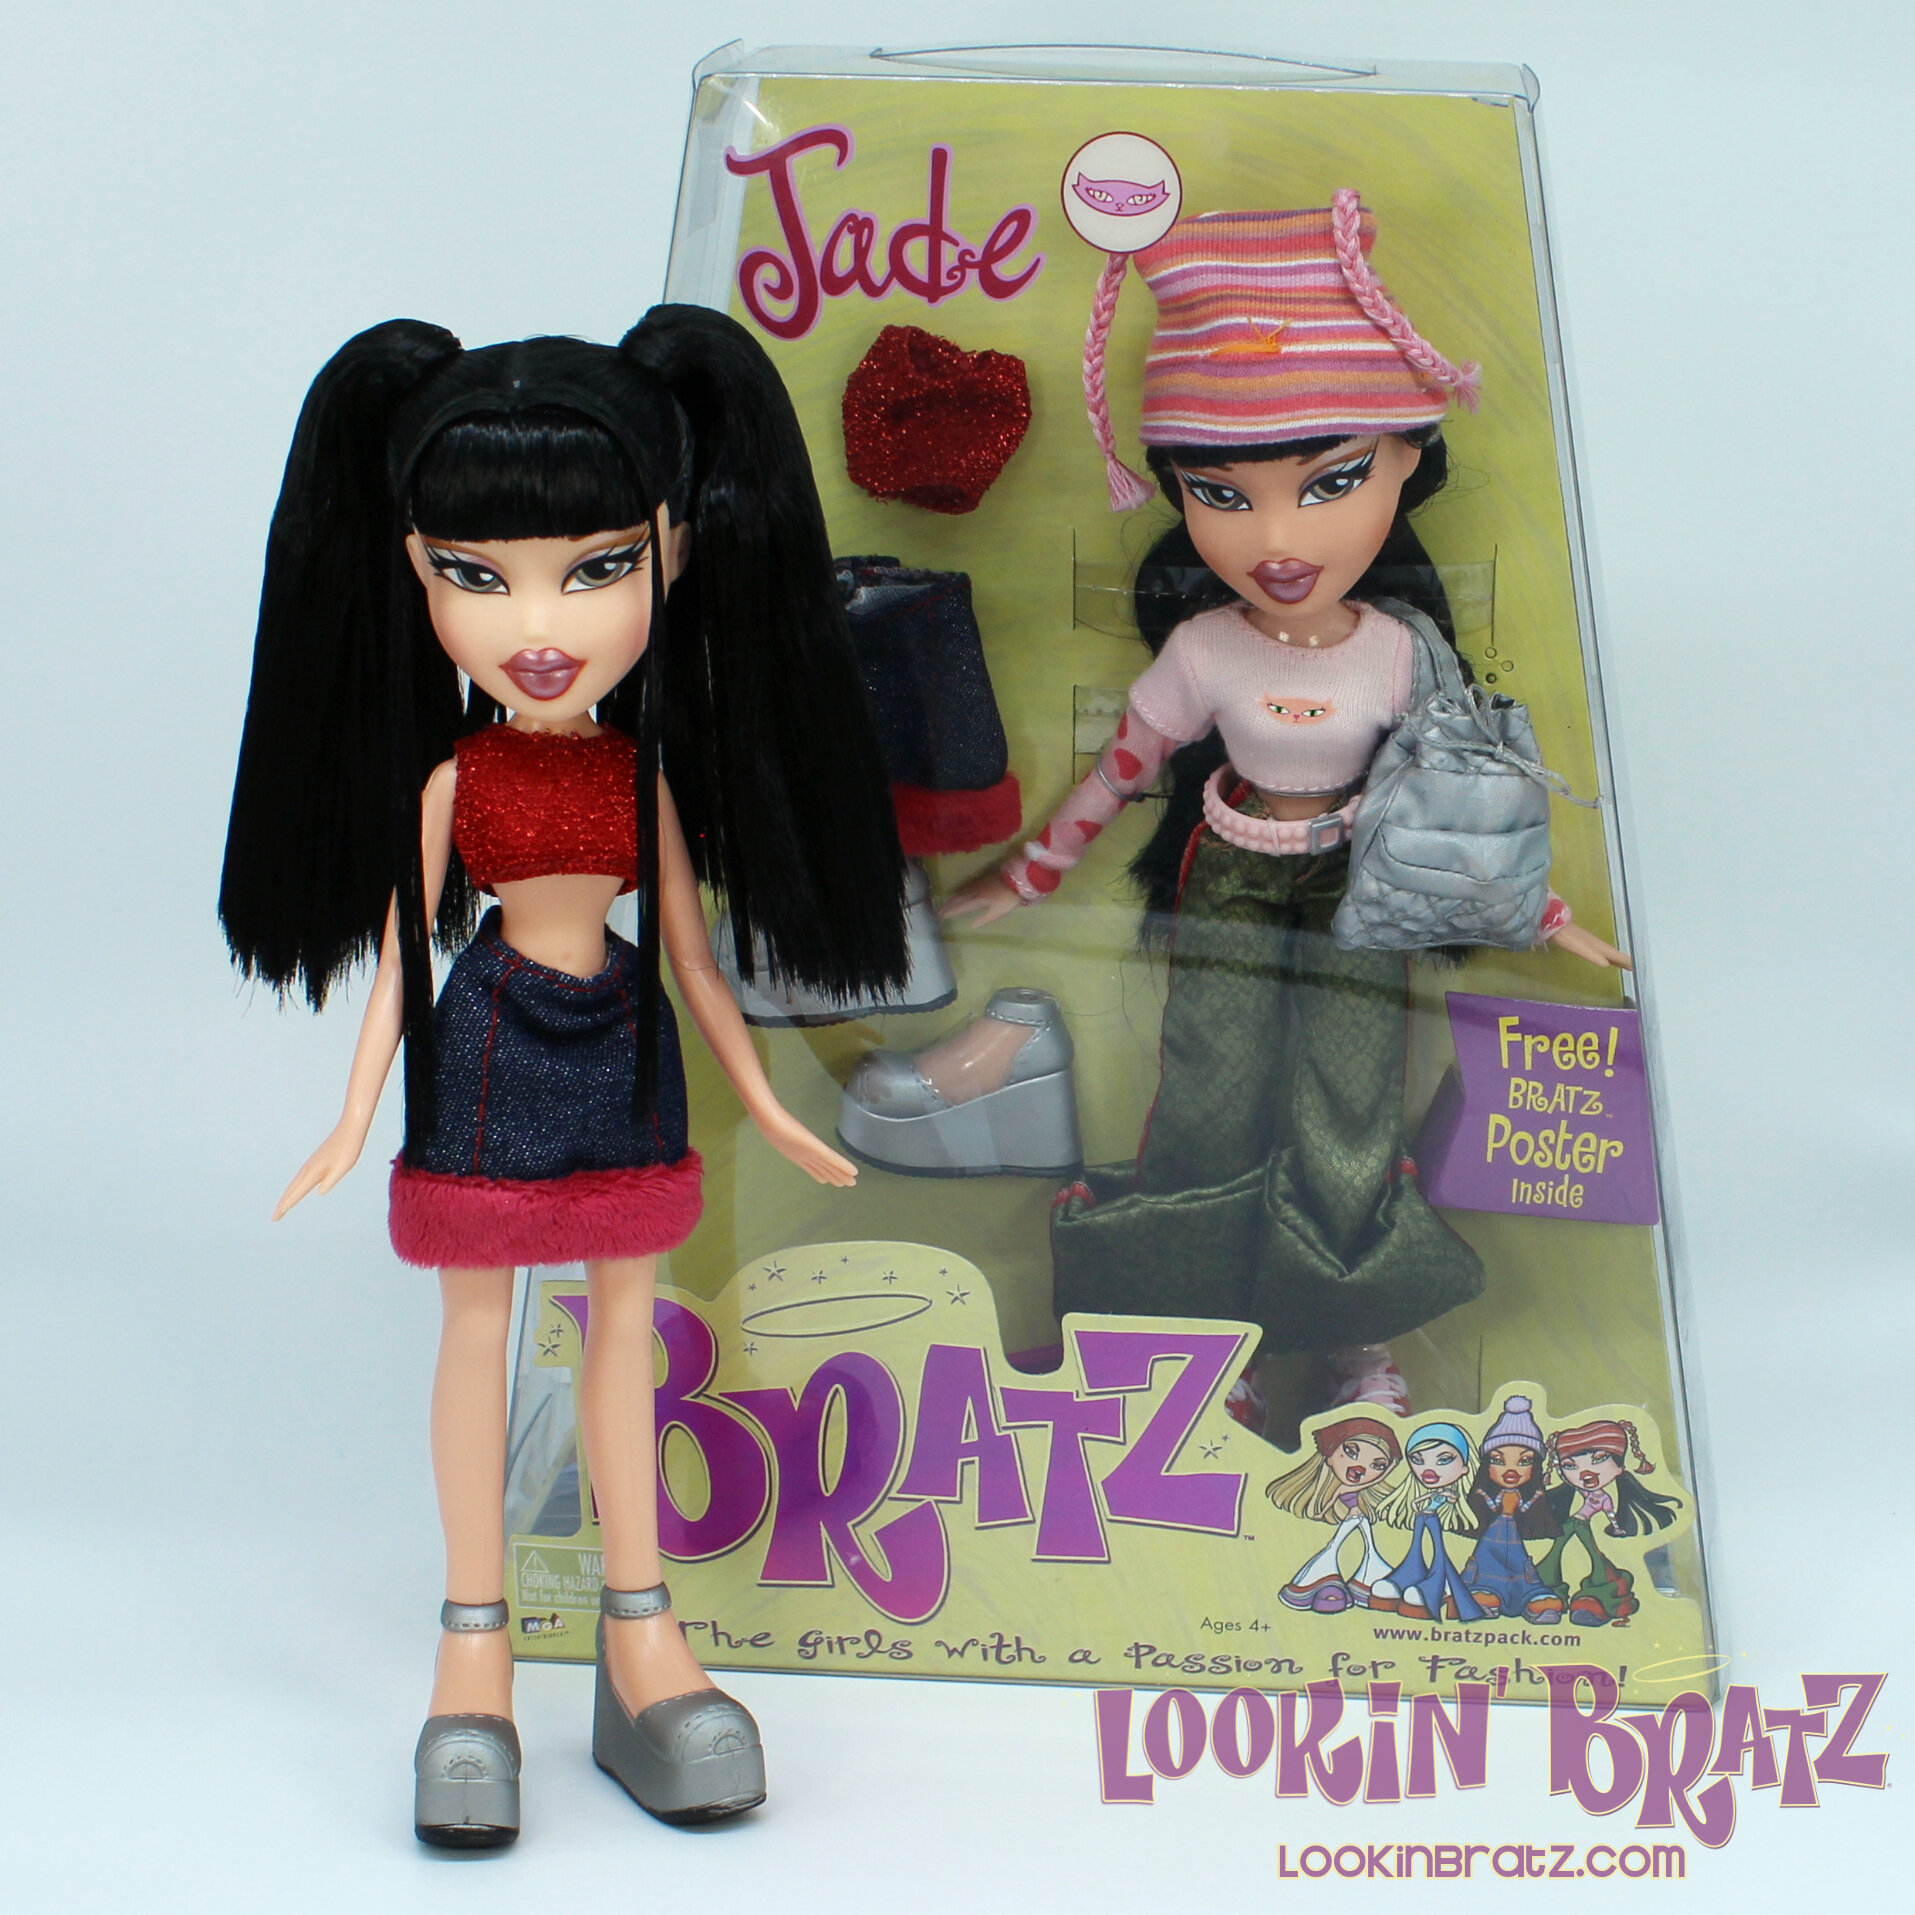 Bratz 20 Yearz Special Edition Jade (2021; unboxed) and Bratz First Edition Re-Release Jade (2005; boxed)